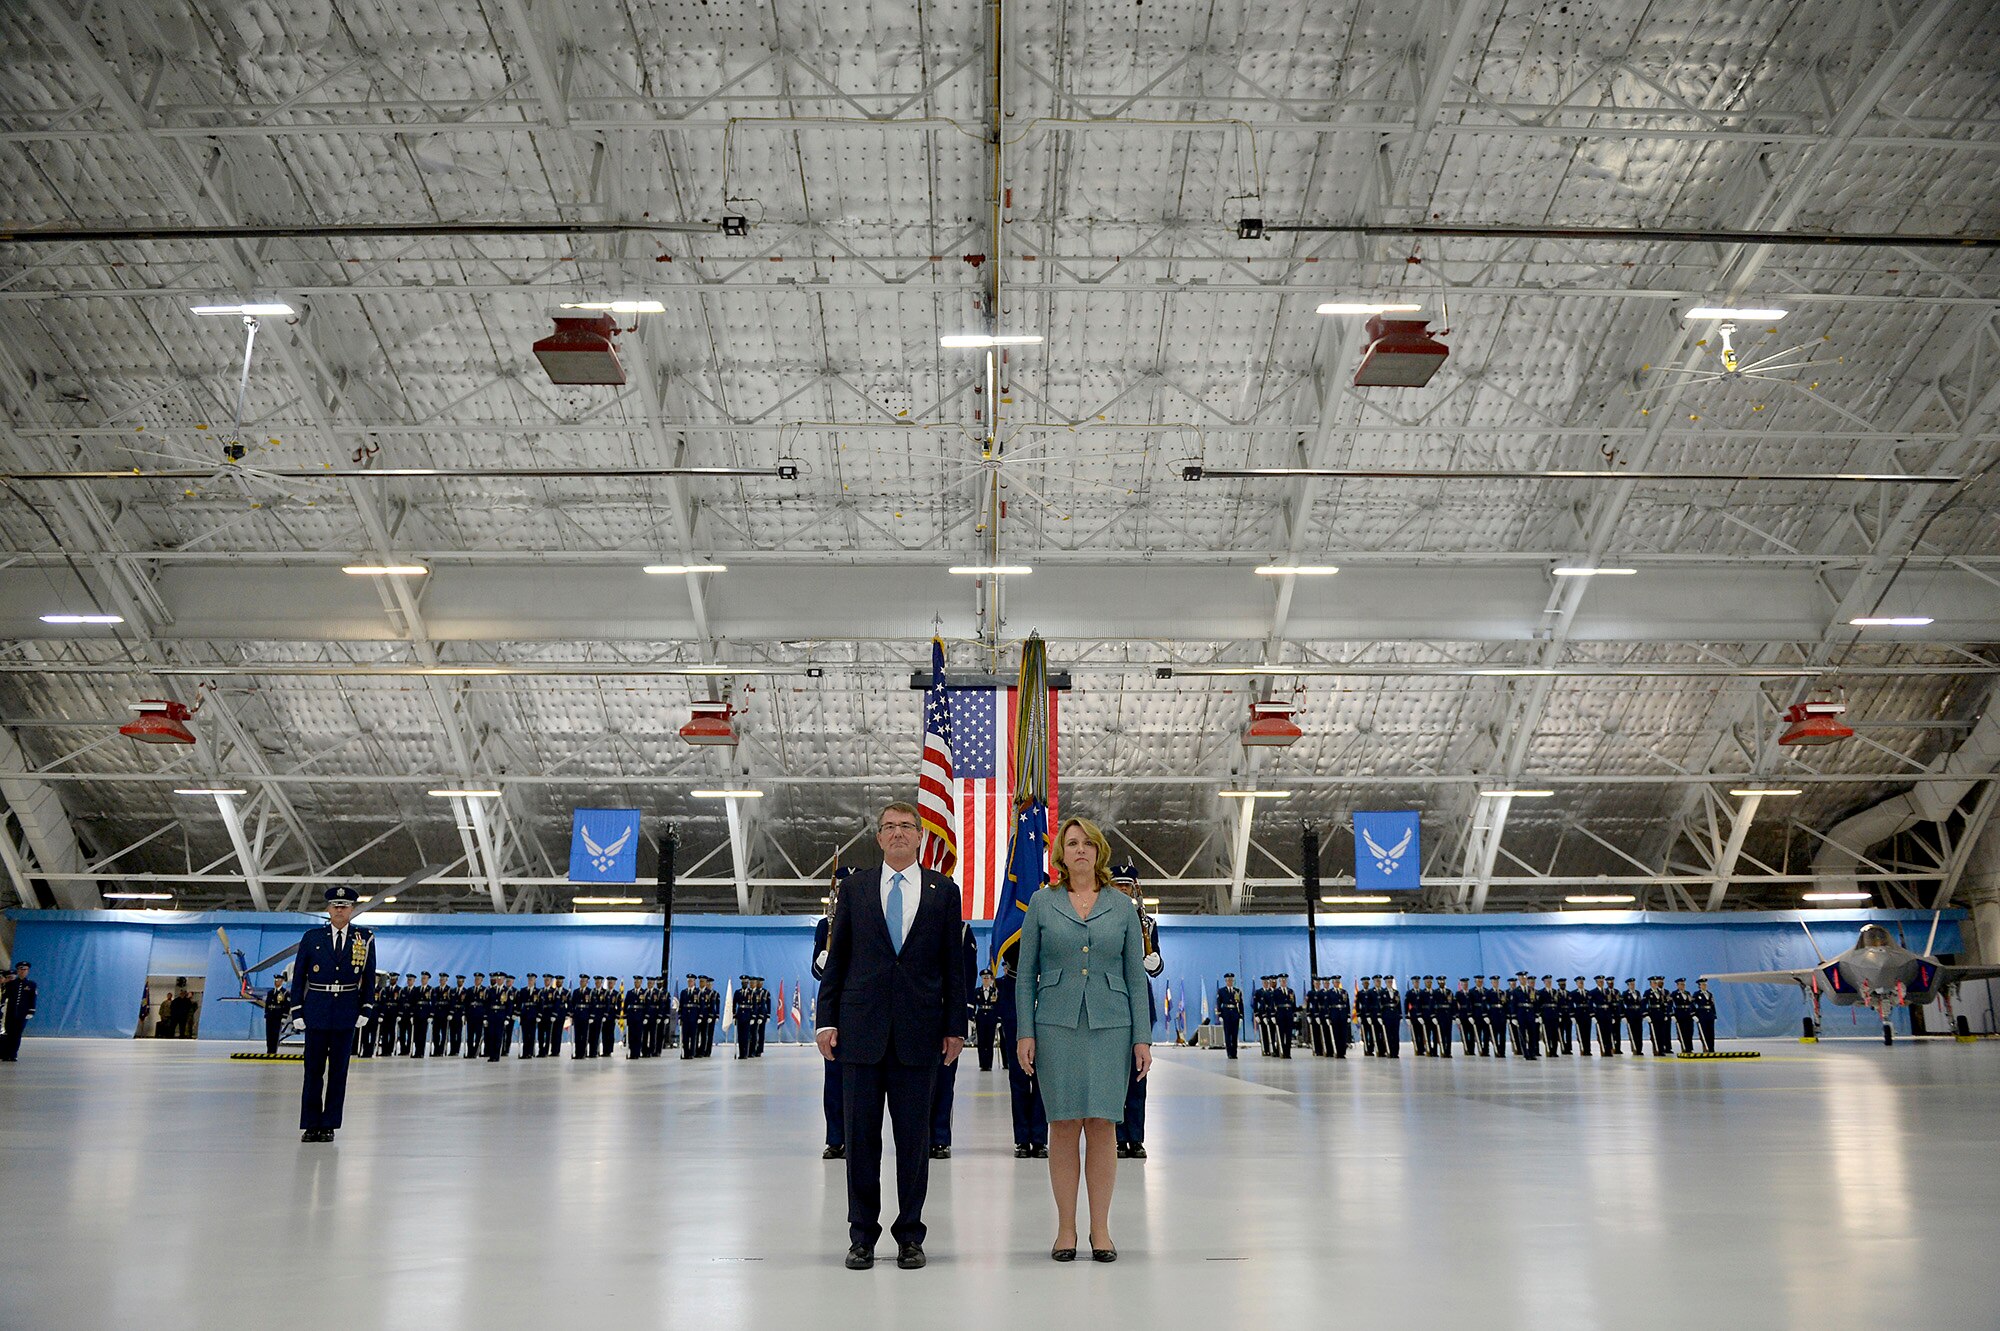 Secretary of Defense Ash Carter and Secretary of the Air Force Deborah Lee James listen to the citation for her Distinguished Public Service award during James' farewell ceremony at Joint Base Andrews, Md., Jan. 11, 2017.  James took office as the 23rd secretary of the Air Force in December 2013. (U.S. Air Force photo/Tech. Sgt. Joshua L. DeMotts)